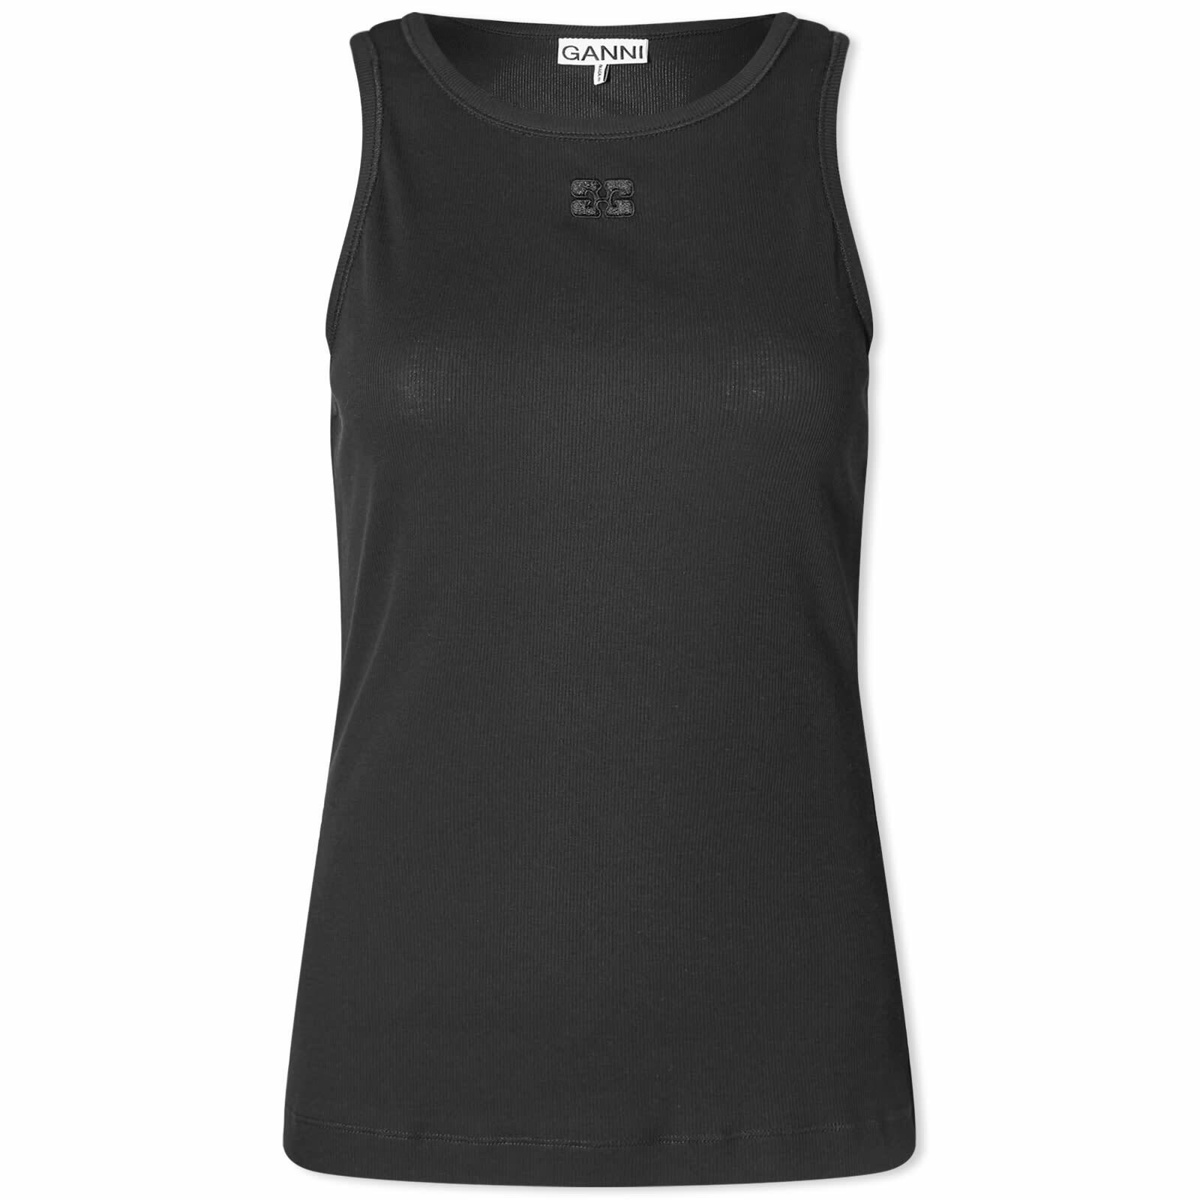 smooth fitted tank top - Black